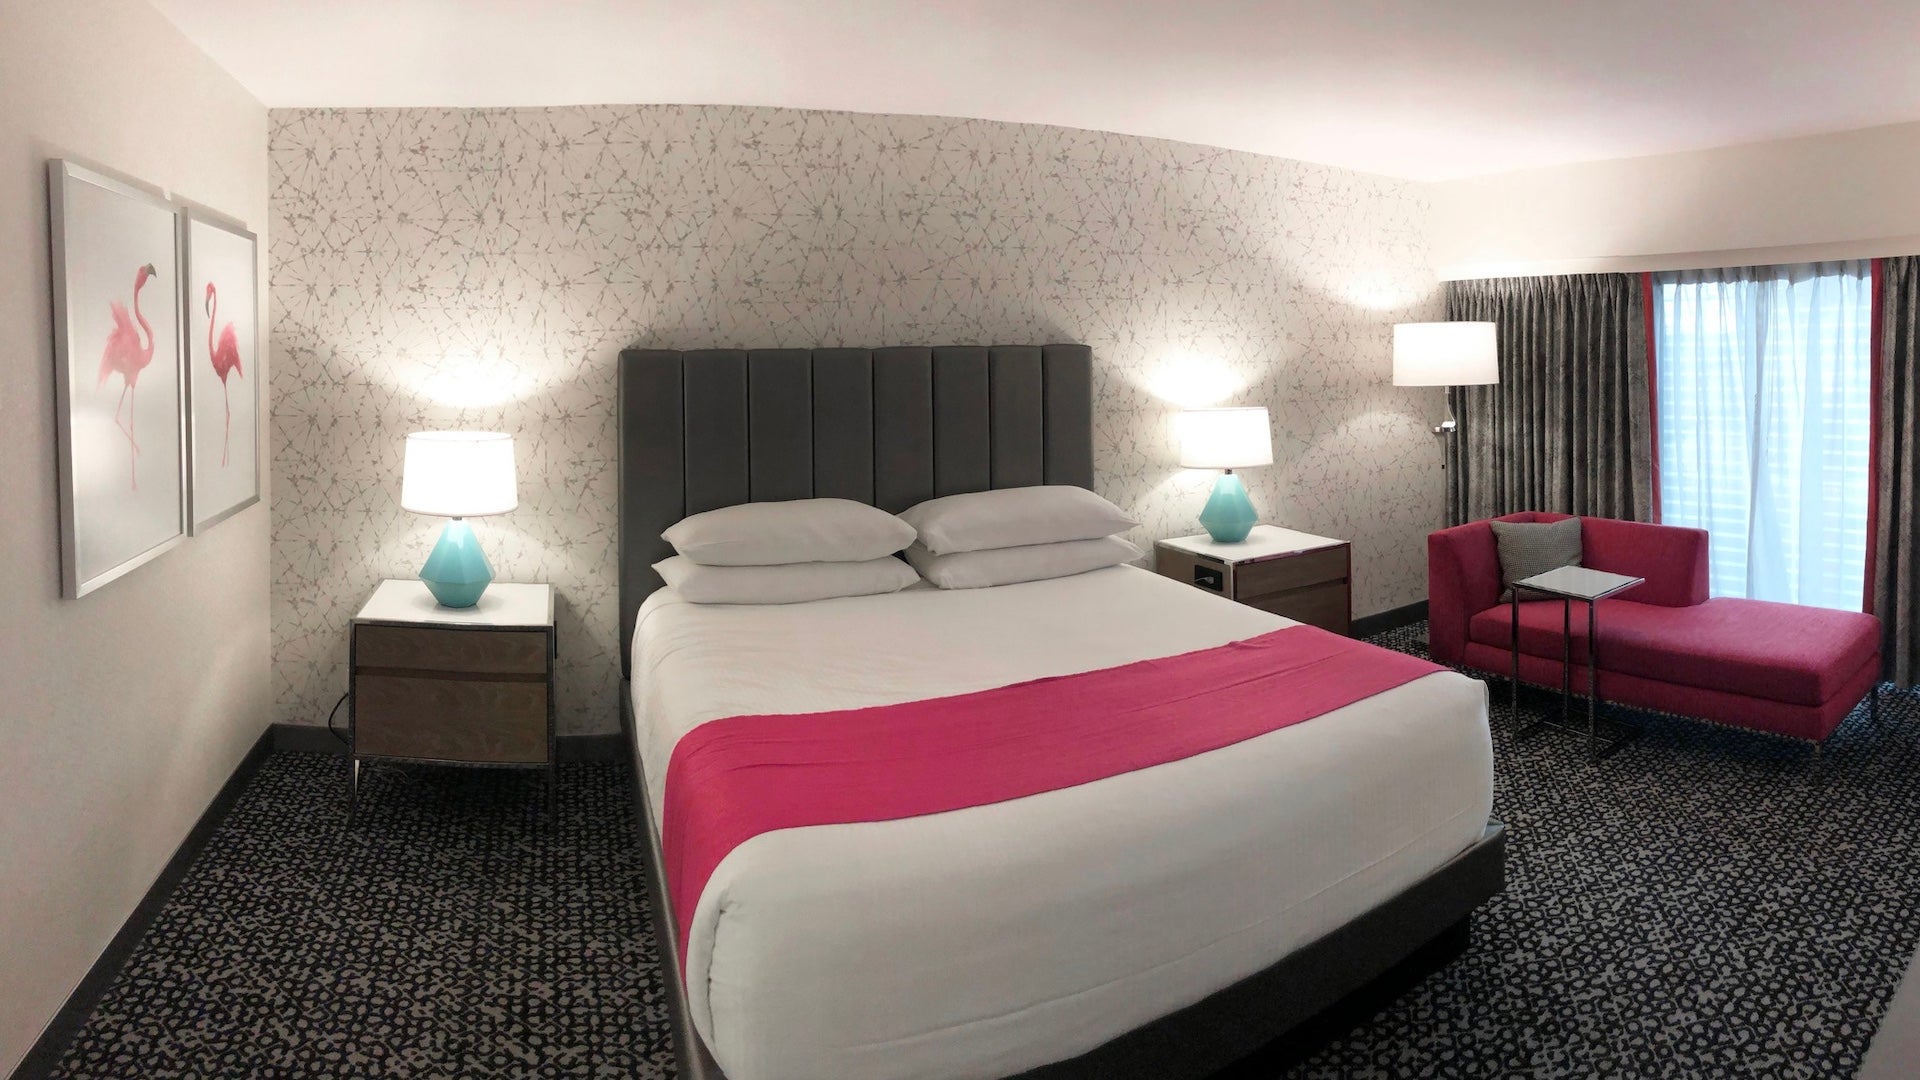 Interior shot of a hotel room with white and pink decor